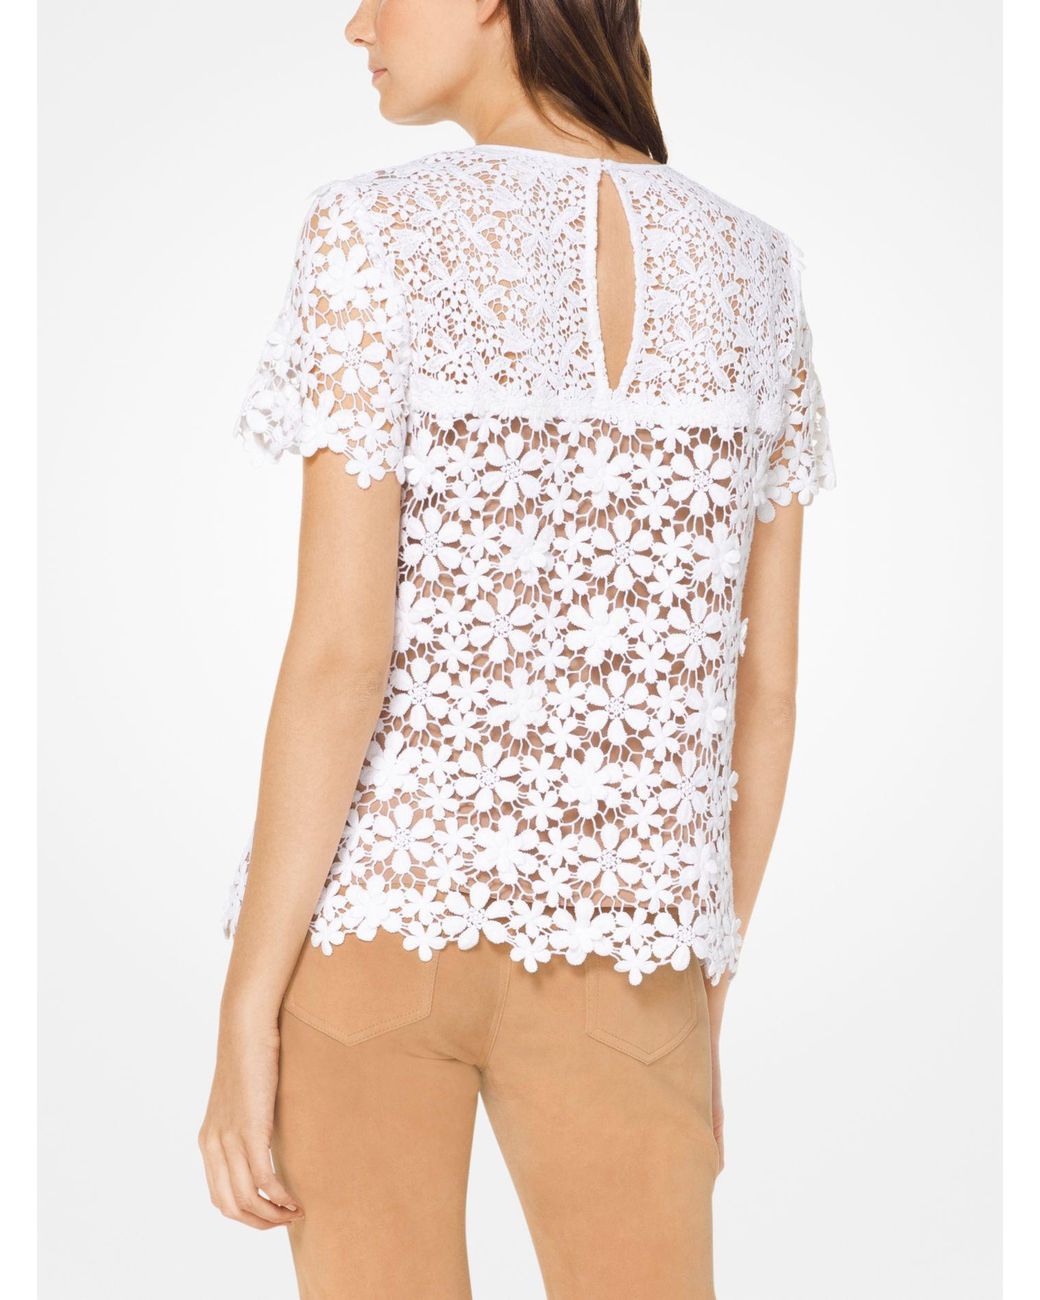 Michael Kors Mixed Floral Lace Top in White | Lyst